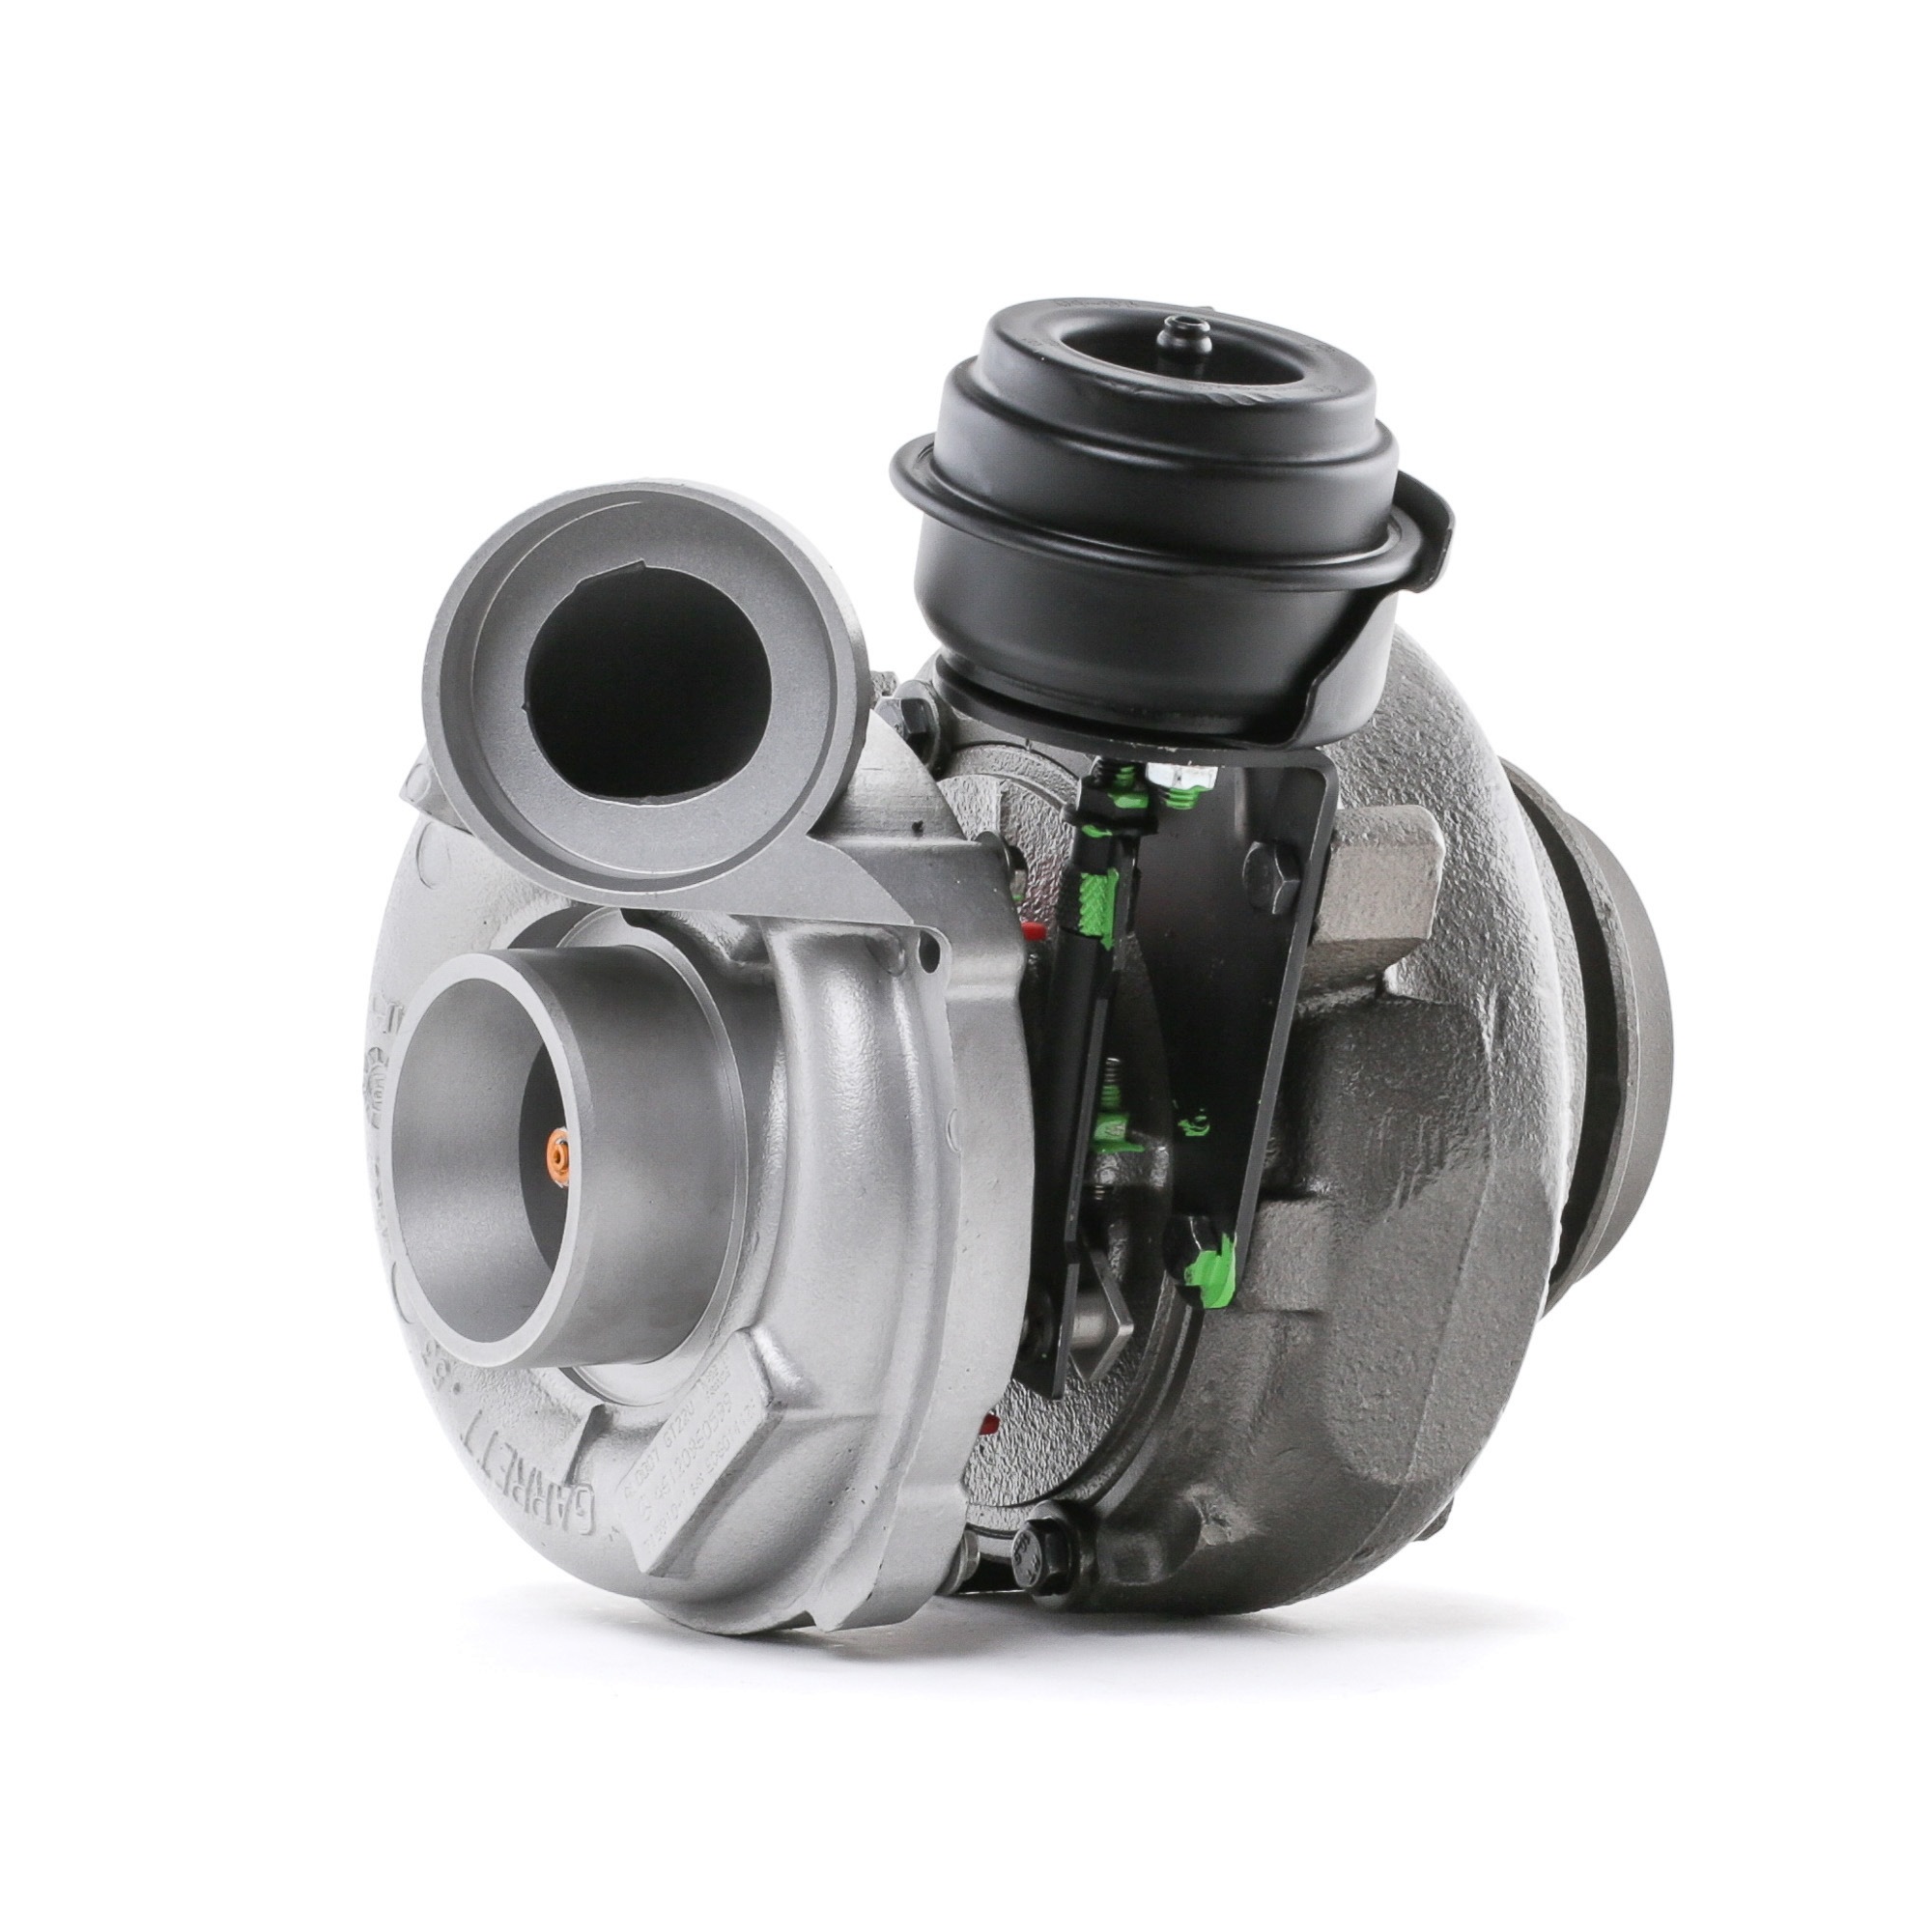 2234C0080R RIDEX REMAN Turbocharger MERCEDES-BENZ Exhaust Turbocharger, VTG turbocharger, supercharged/turbocharged, Charger/Charge Air Cooler, Turbo, Turbocharger/Charge Air cooler, Turbocharger/Supercharger, Euro 3, Pneumatic, without attachment material